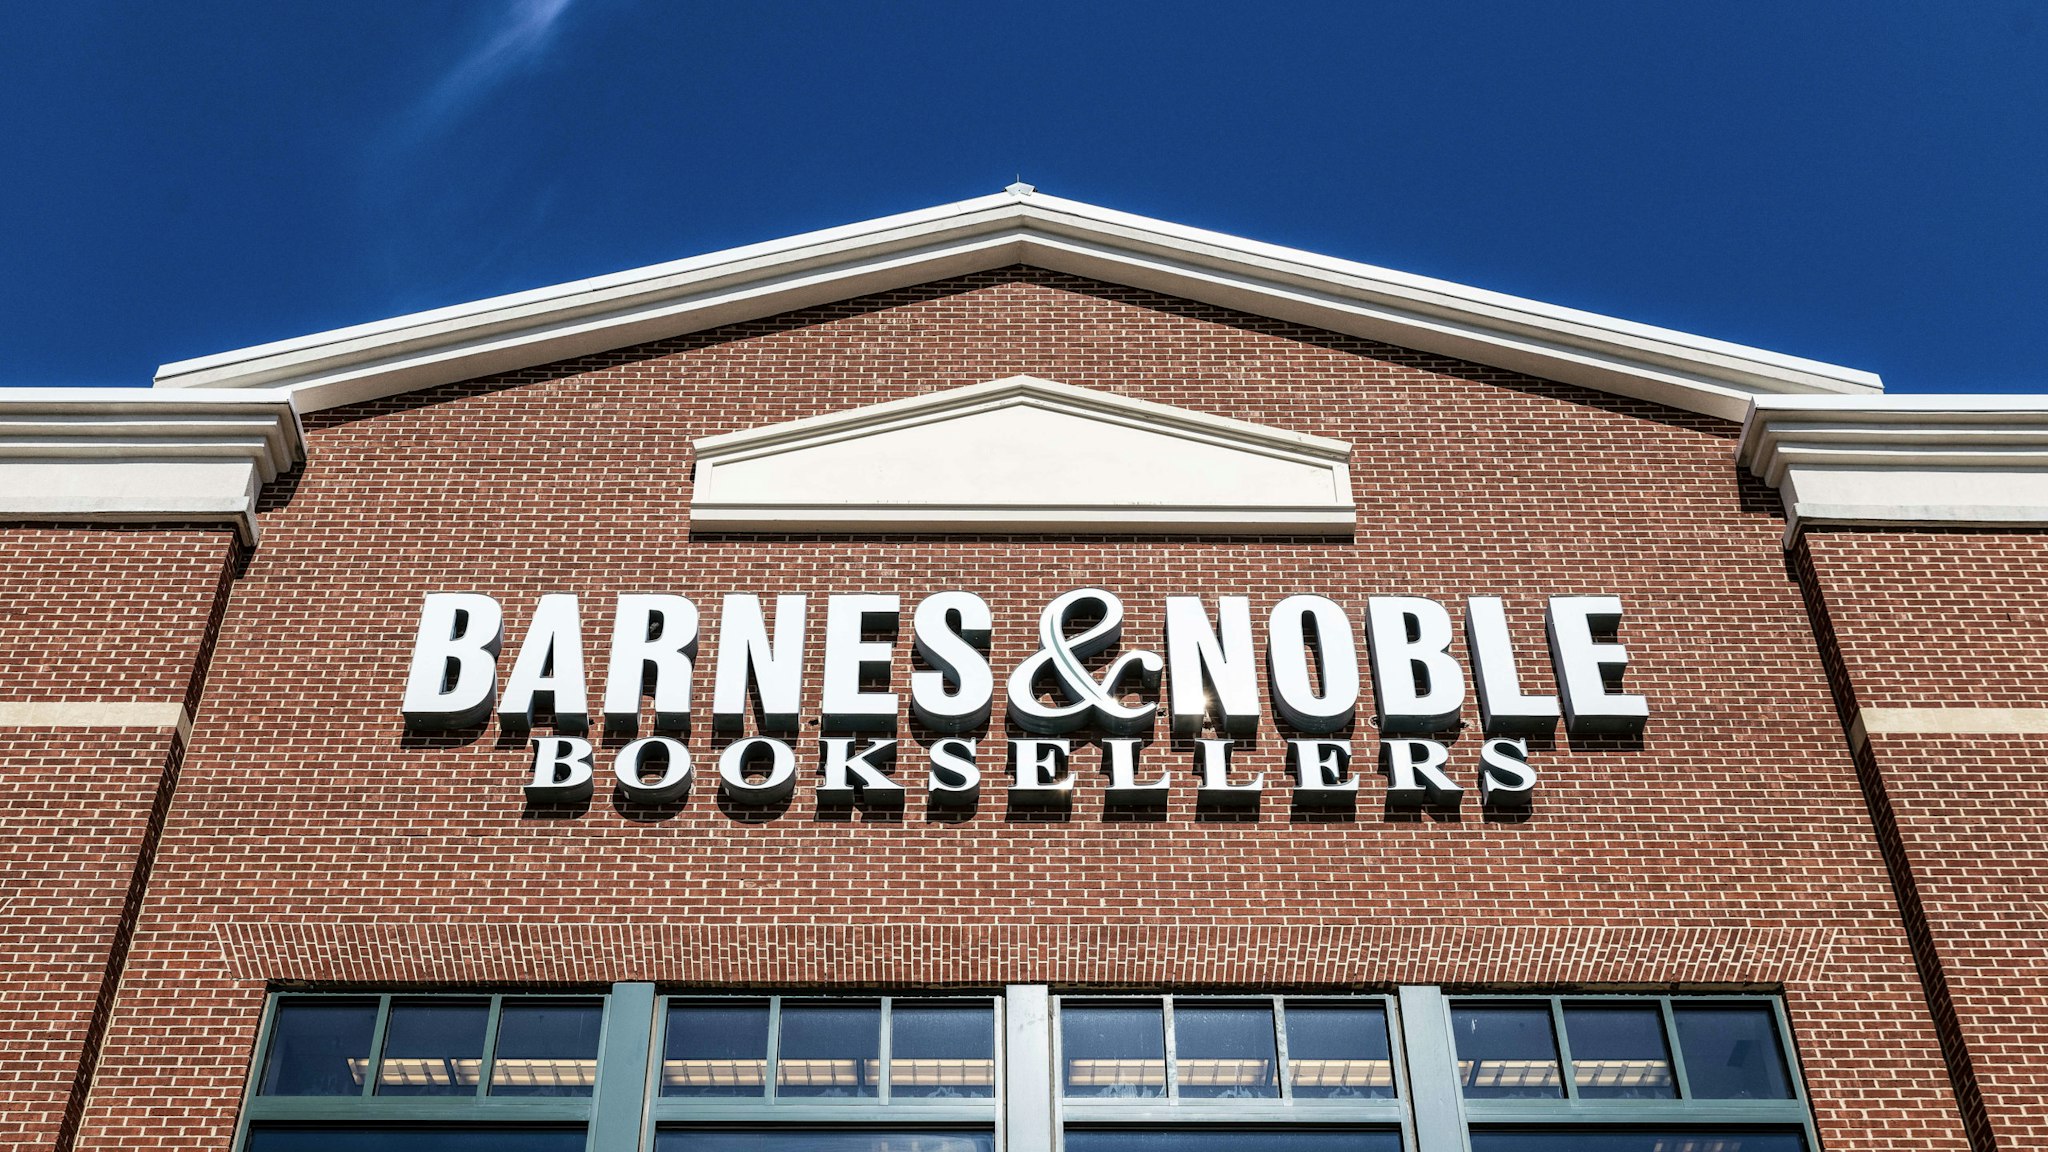 WOODBRIAR EAST, BUFORD, GEORGIA, UNITED STATES - 2019/03/28: Exterior of Barnes and Noble bookstore, Mall of Georgia. (Photo by John Greim/LightRocket via Getty Images)